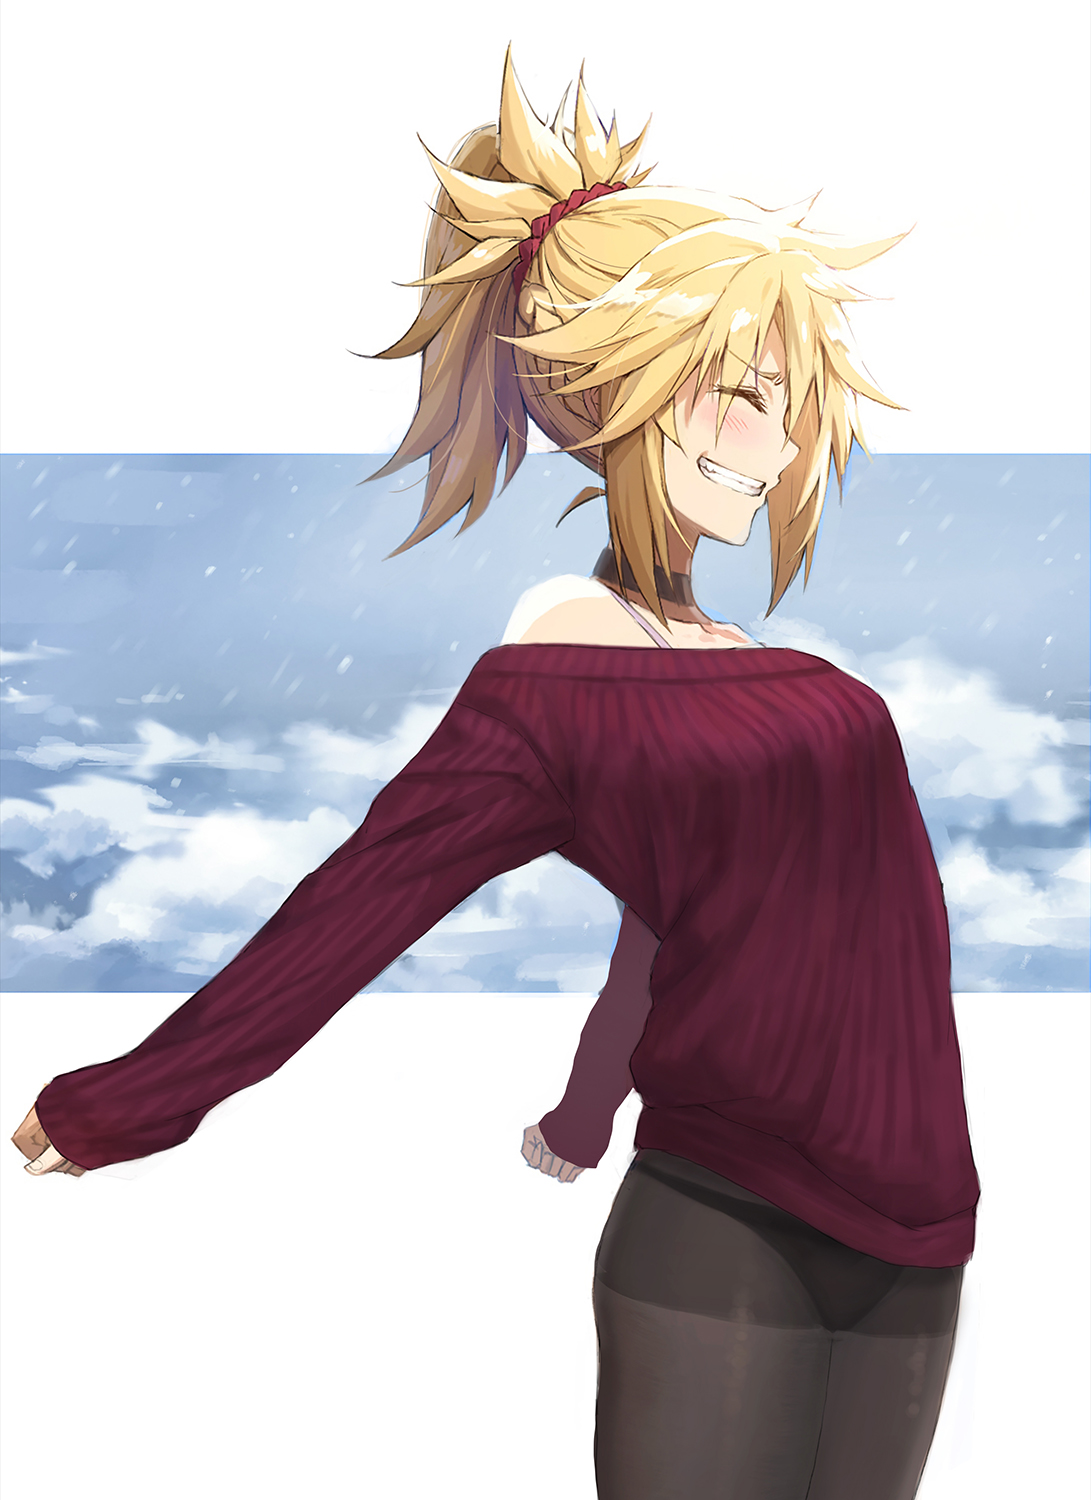 Anime Anime Girls Fate Series Fate Apocrypha Fate Grand Order Mordred Fate Apocrypha Ponytail Long H 1091x1500